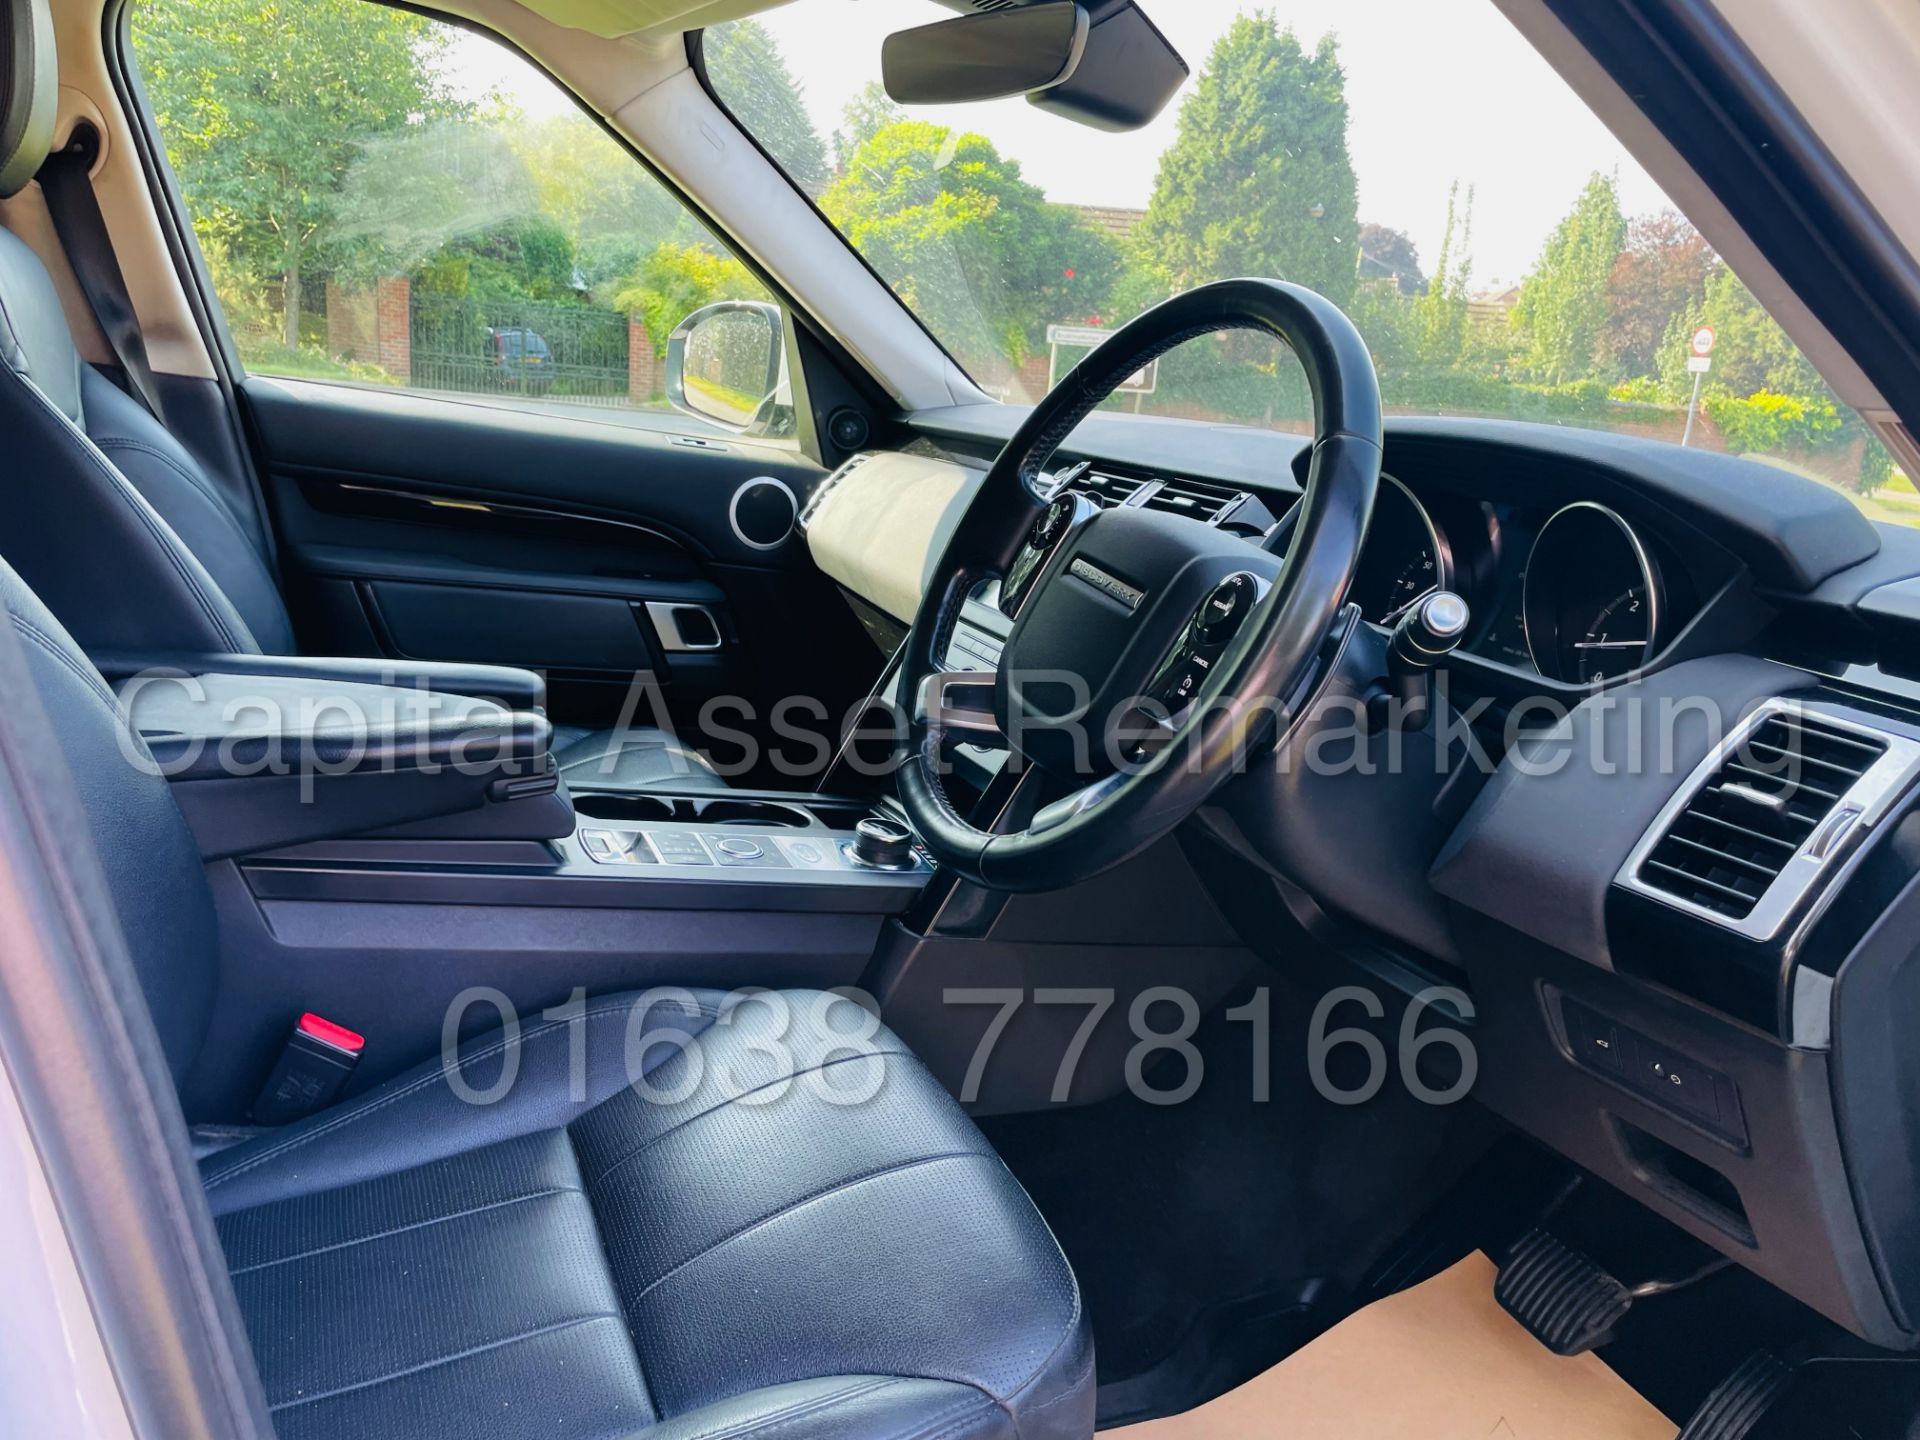 LAND ROVER DISCOVERY 5 *SE EDITION* SUV (2019 - EURO 6) '3.0 TD6 -306 BHP- 8 SPEED AUTO' *HUGE SPEC* - Image 31 of 47